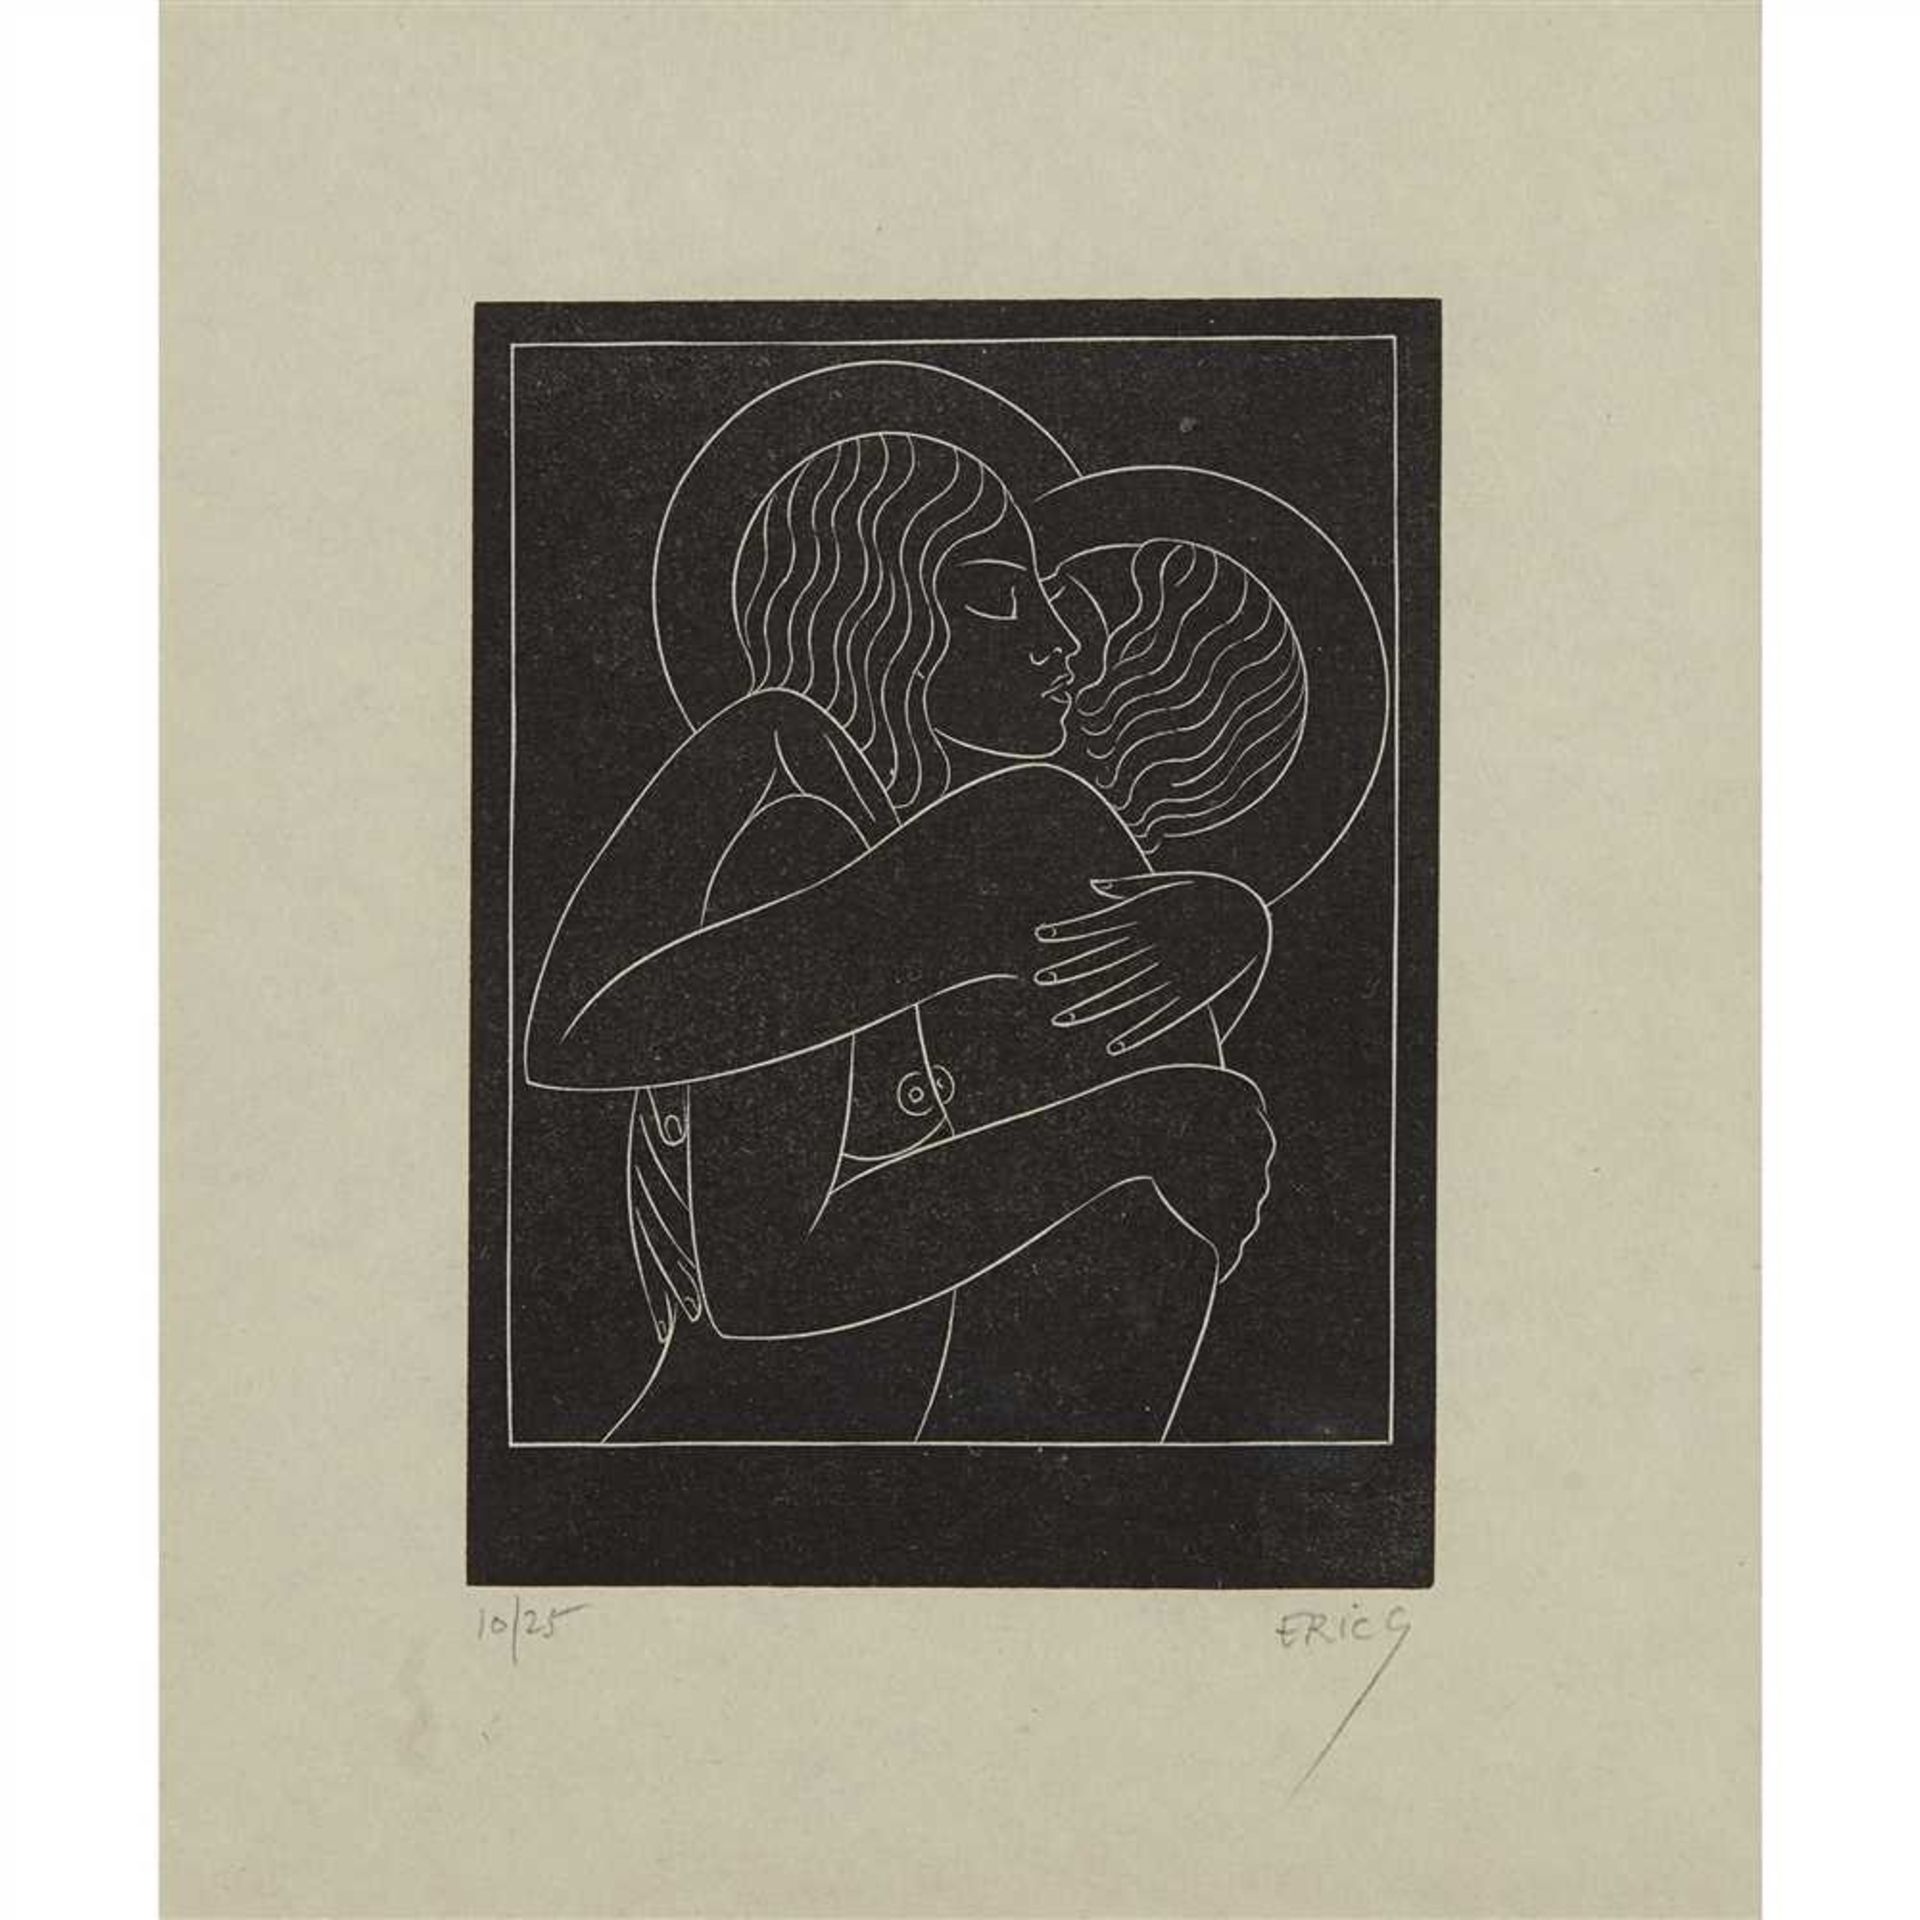 ERIC GILL (1882-1940) 'BELLE SAUVAGE', CIRCA 1925 unframed woodcut, signed lower right in pencil, - Image 2 of 4